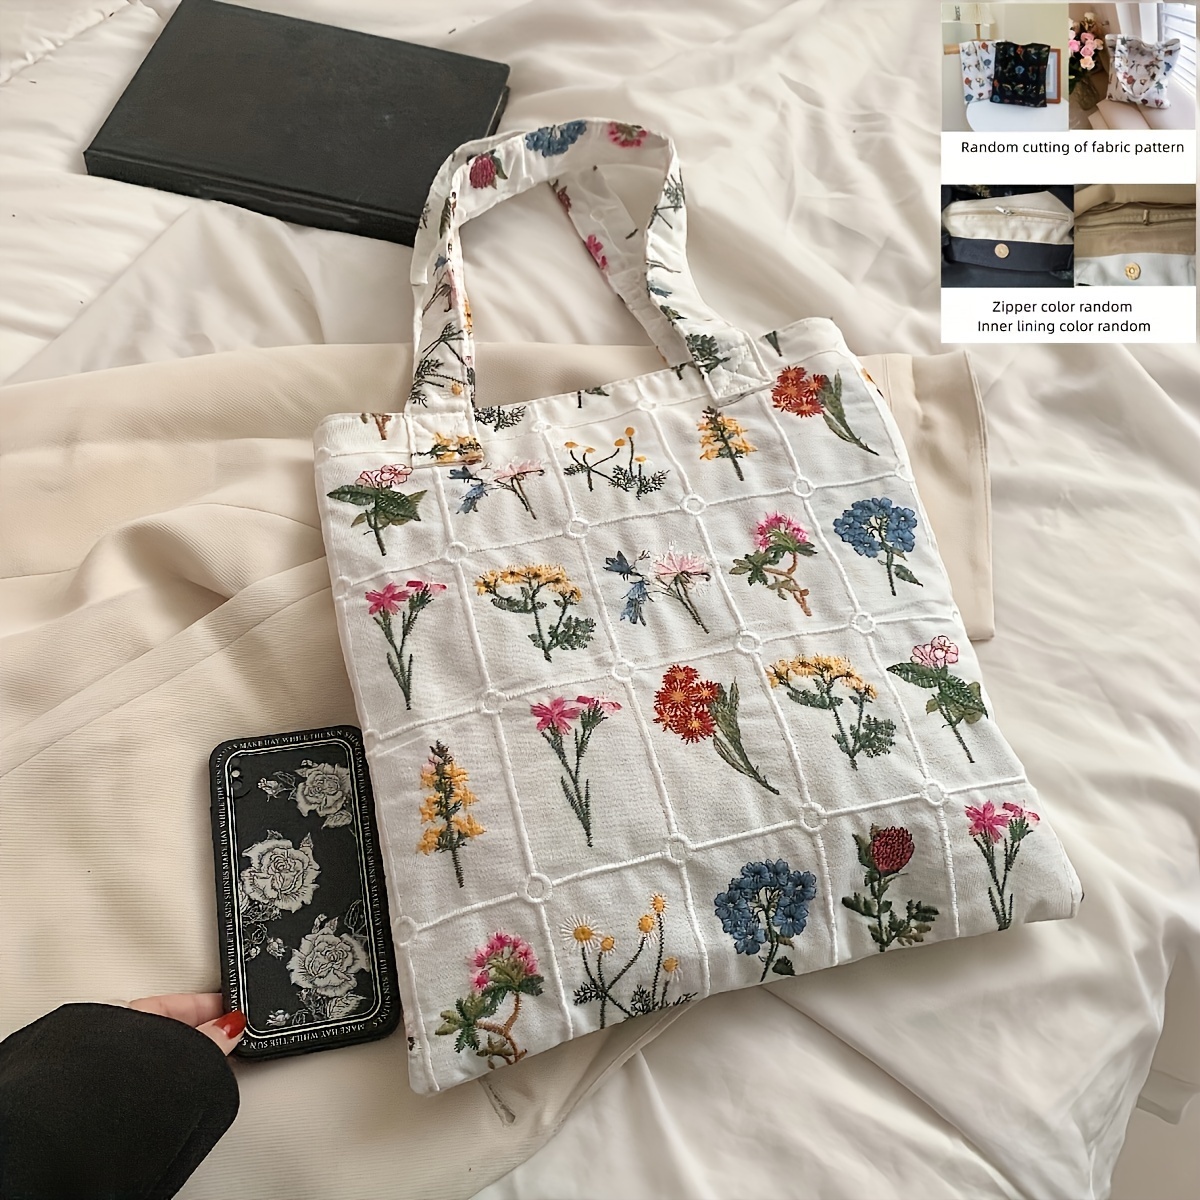 

1pc Floral Embroidery Fabric Tote Bag, Aesthetic Plaid Shoulder Bag, Women's Handbag For Shopping, School, Work